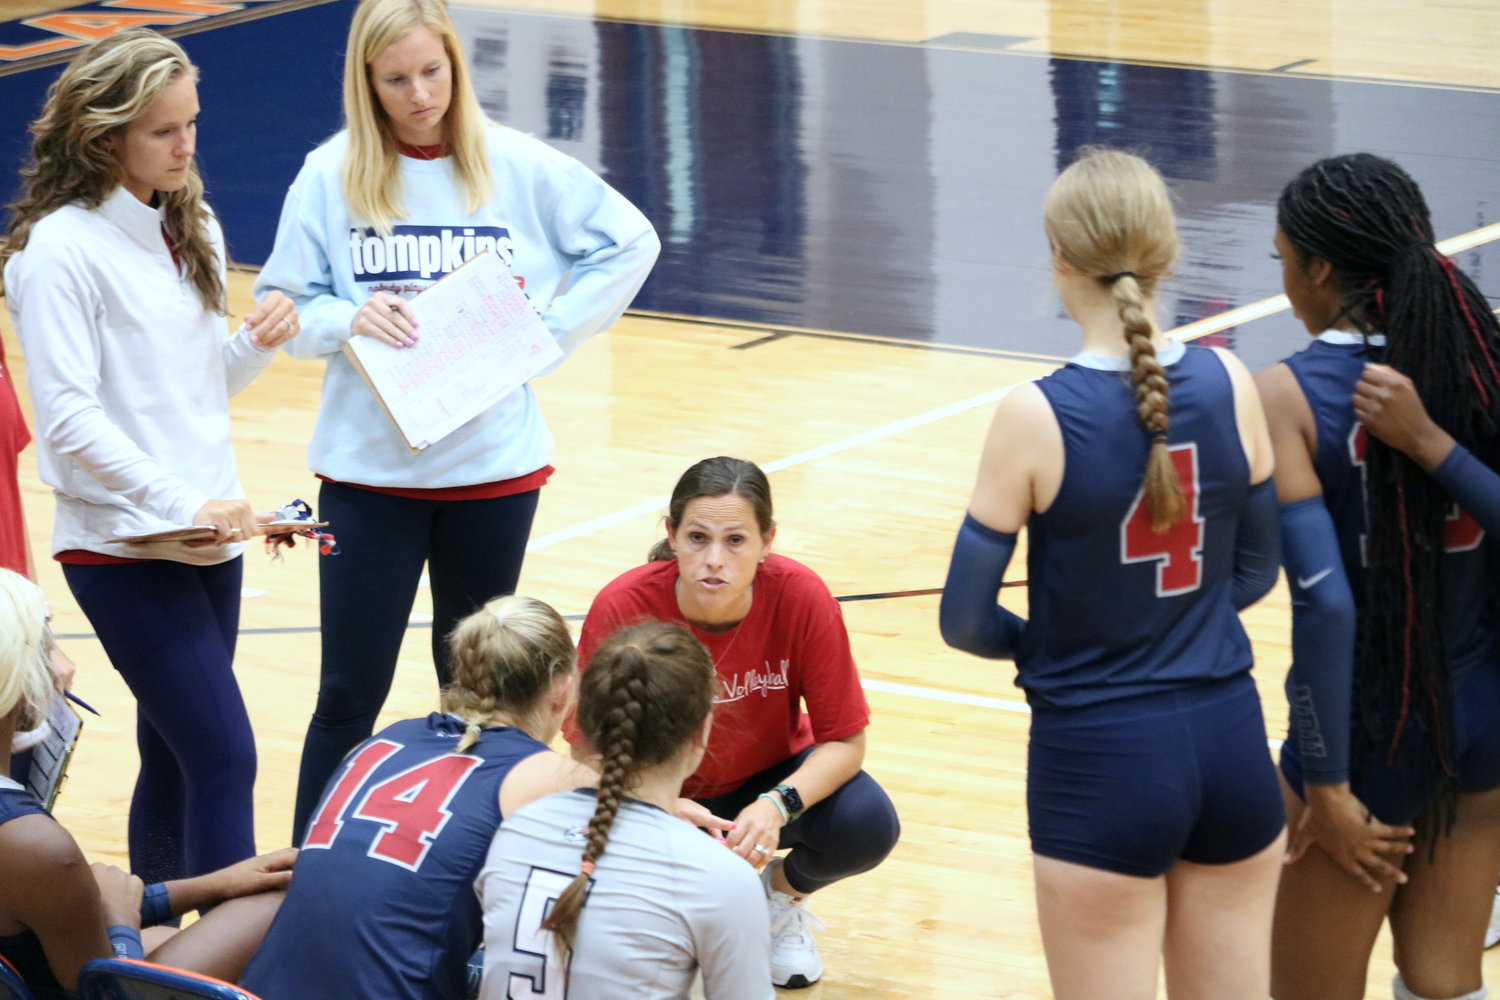 Tompkins head coach Allison Merrell talks to her team during a timeout against Canyon in the finals match of gold bracket Katy ISD/Cy-Fair Tournament at Bridgeland.